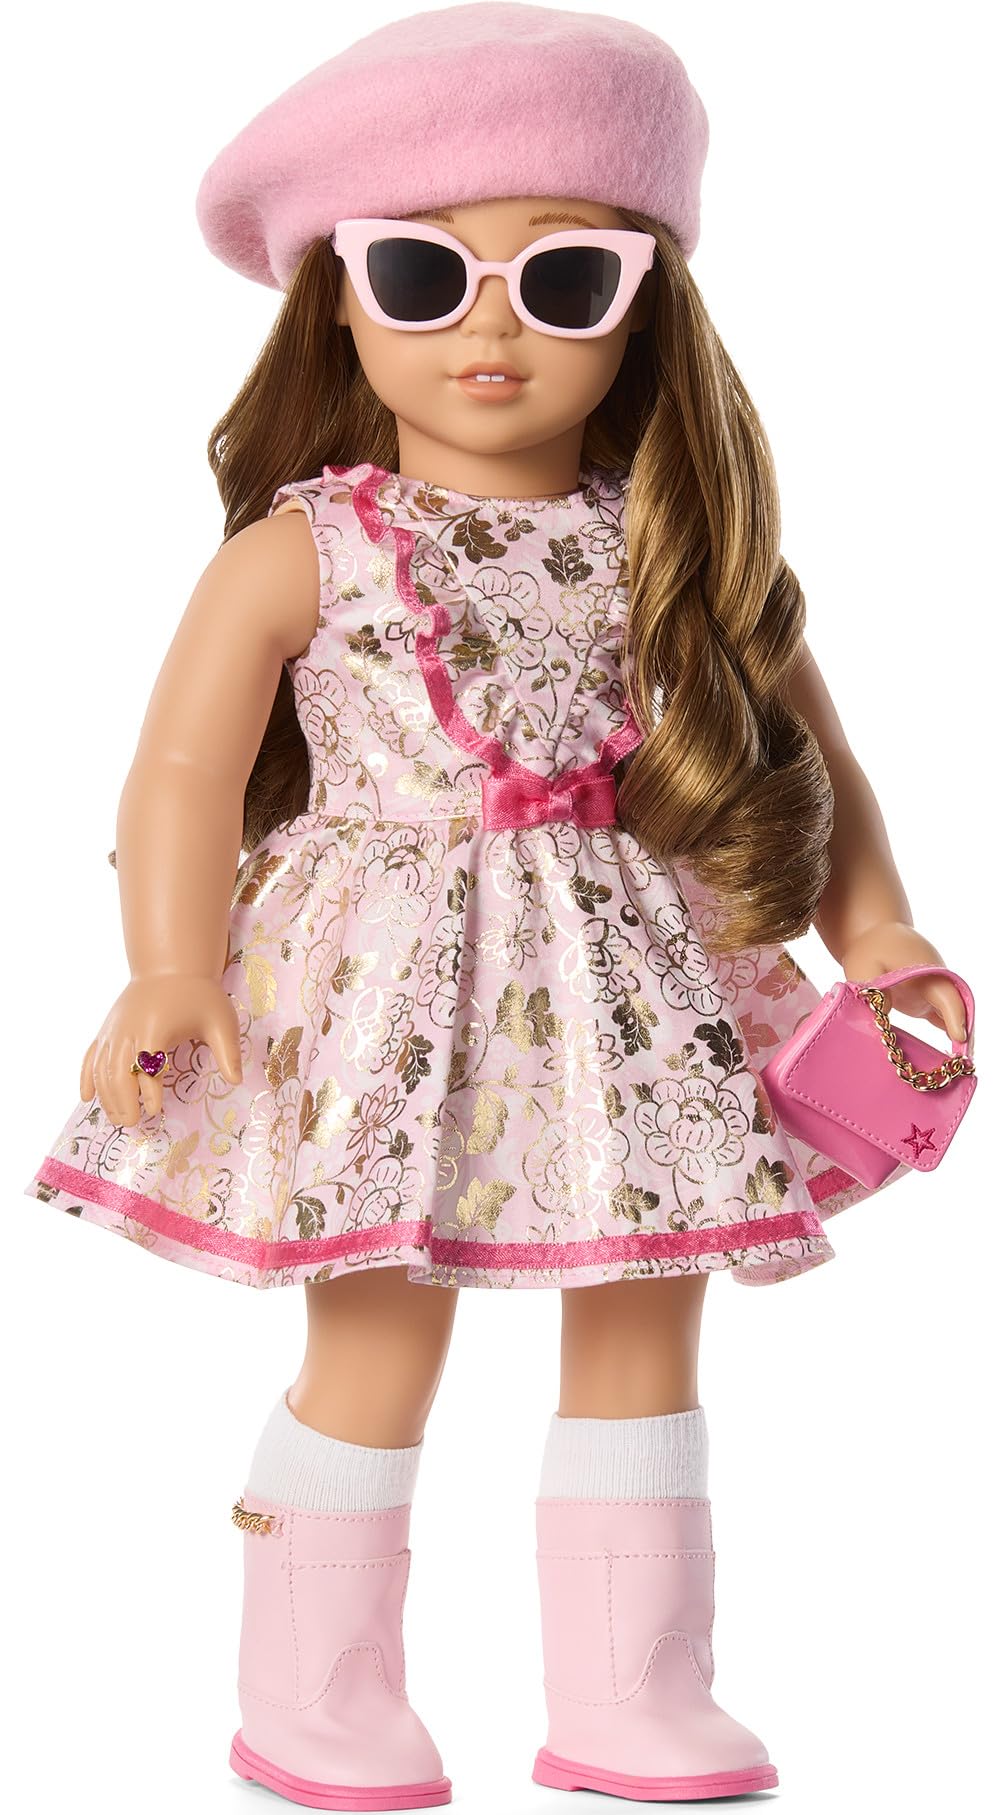 American Girl Truly Me 18-inch Doll Pink Chic Accessories with Purse, Beret, Sunglasses, and Heart Ring, for Ages 6+